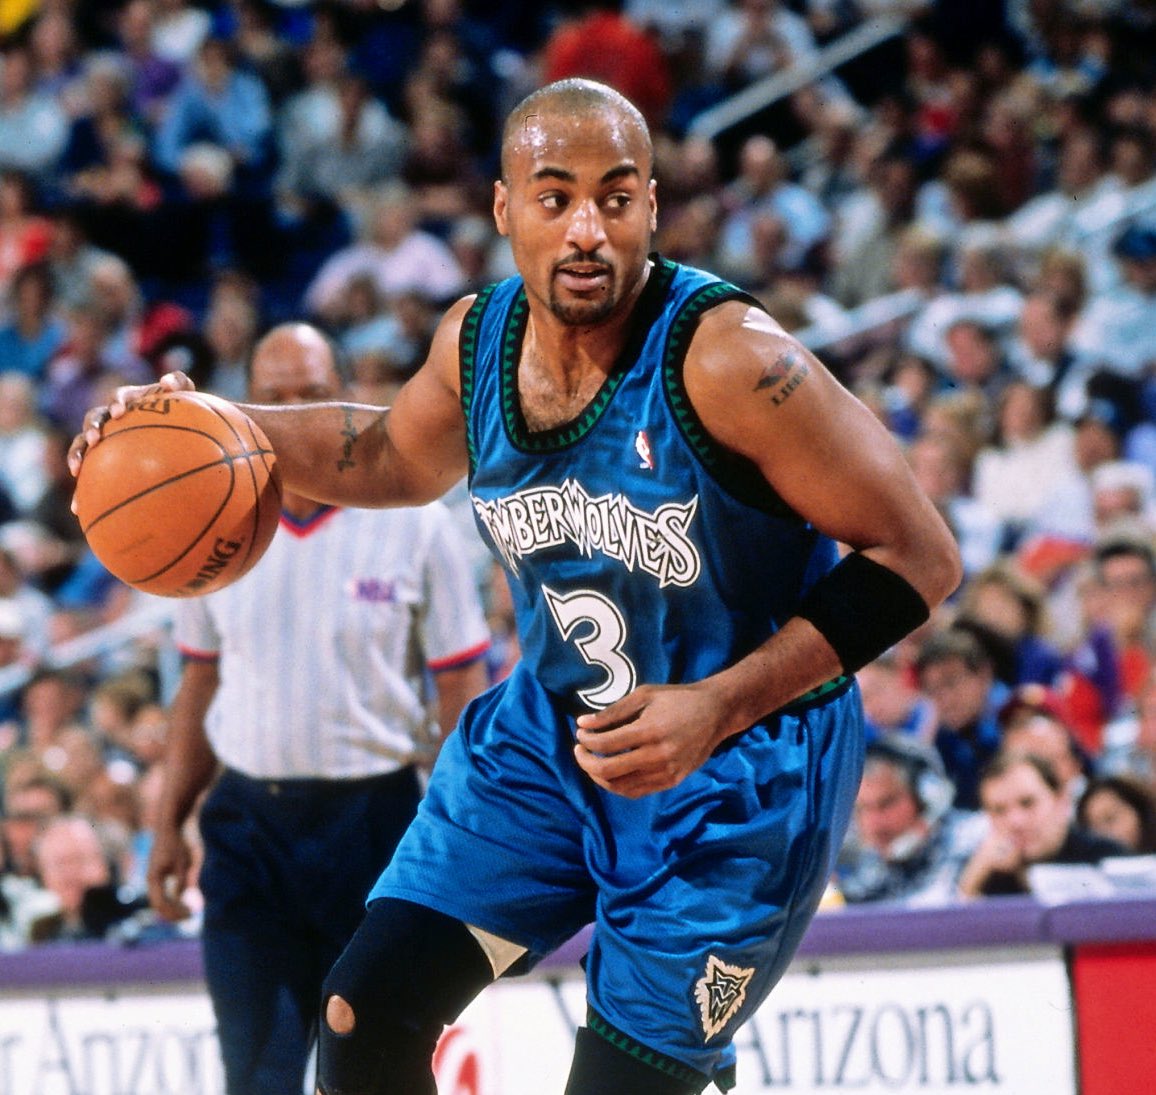 Dennis Scott was a member of the:Suns (33 games)Knicks (15 games)Timberwolves (21 games)Grizzlies (66 games)in addition to playing 52 games with the Mavs.